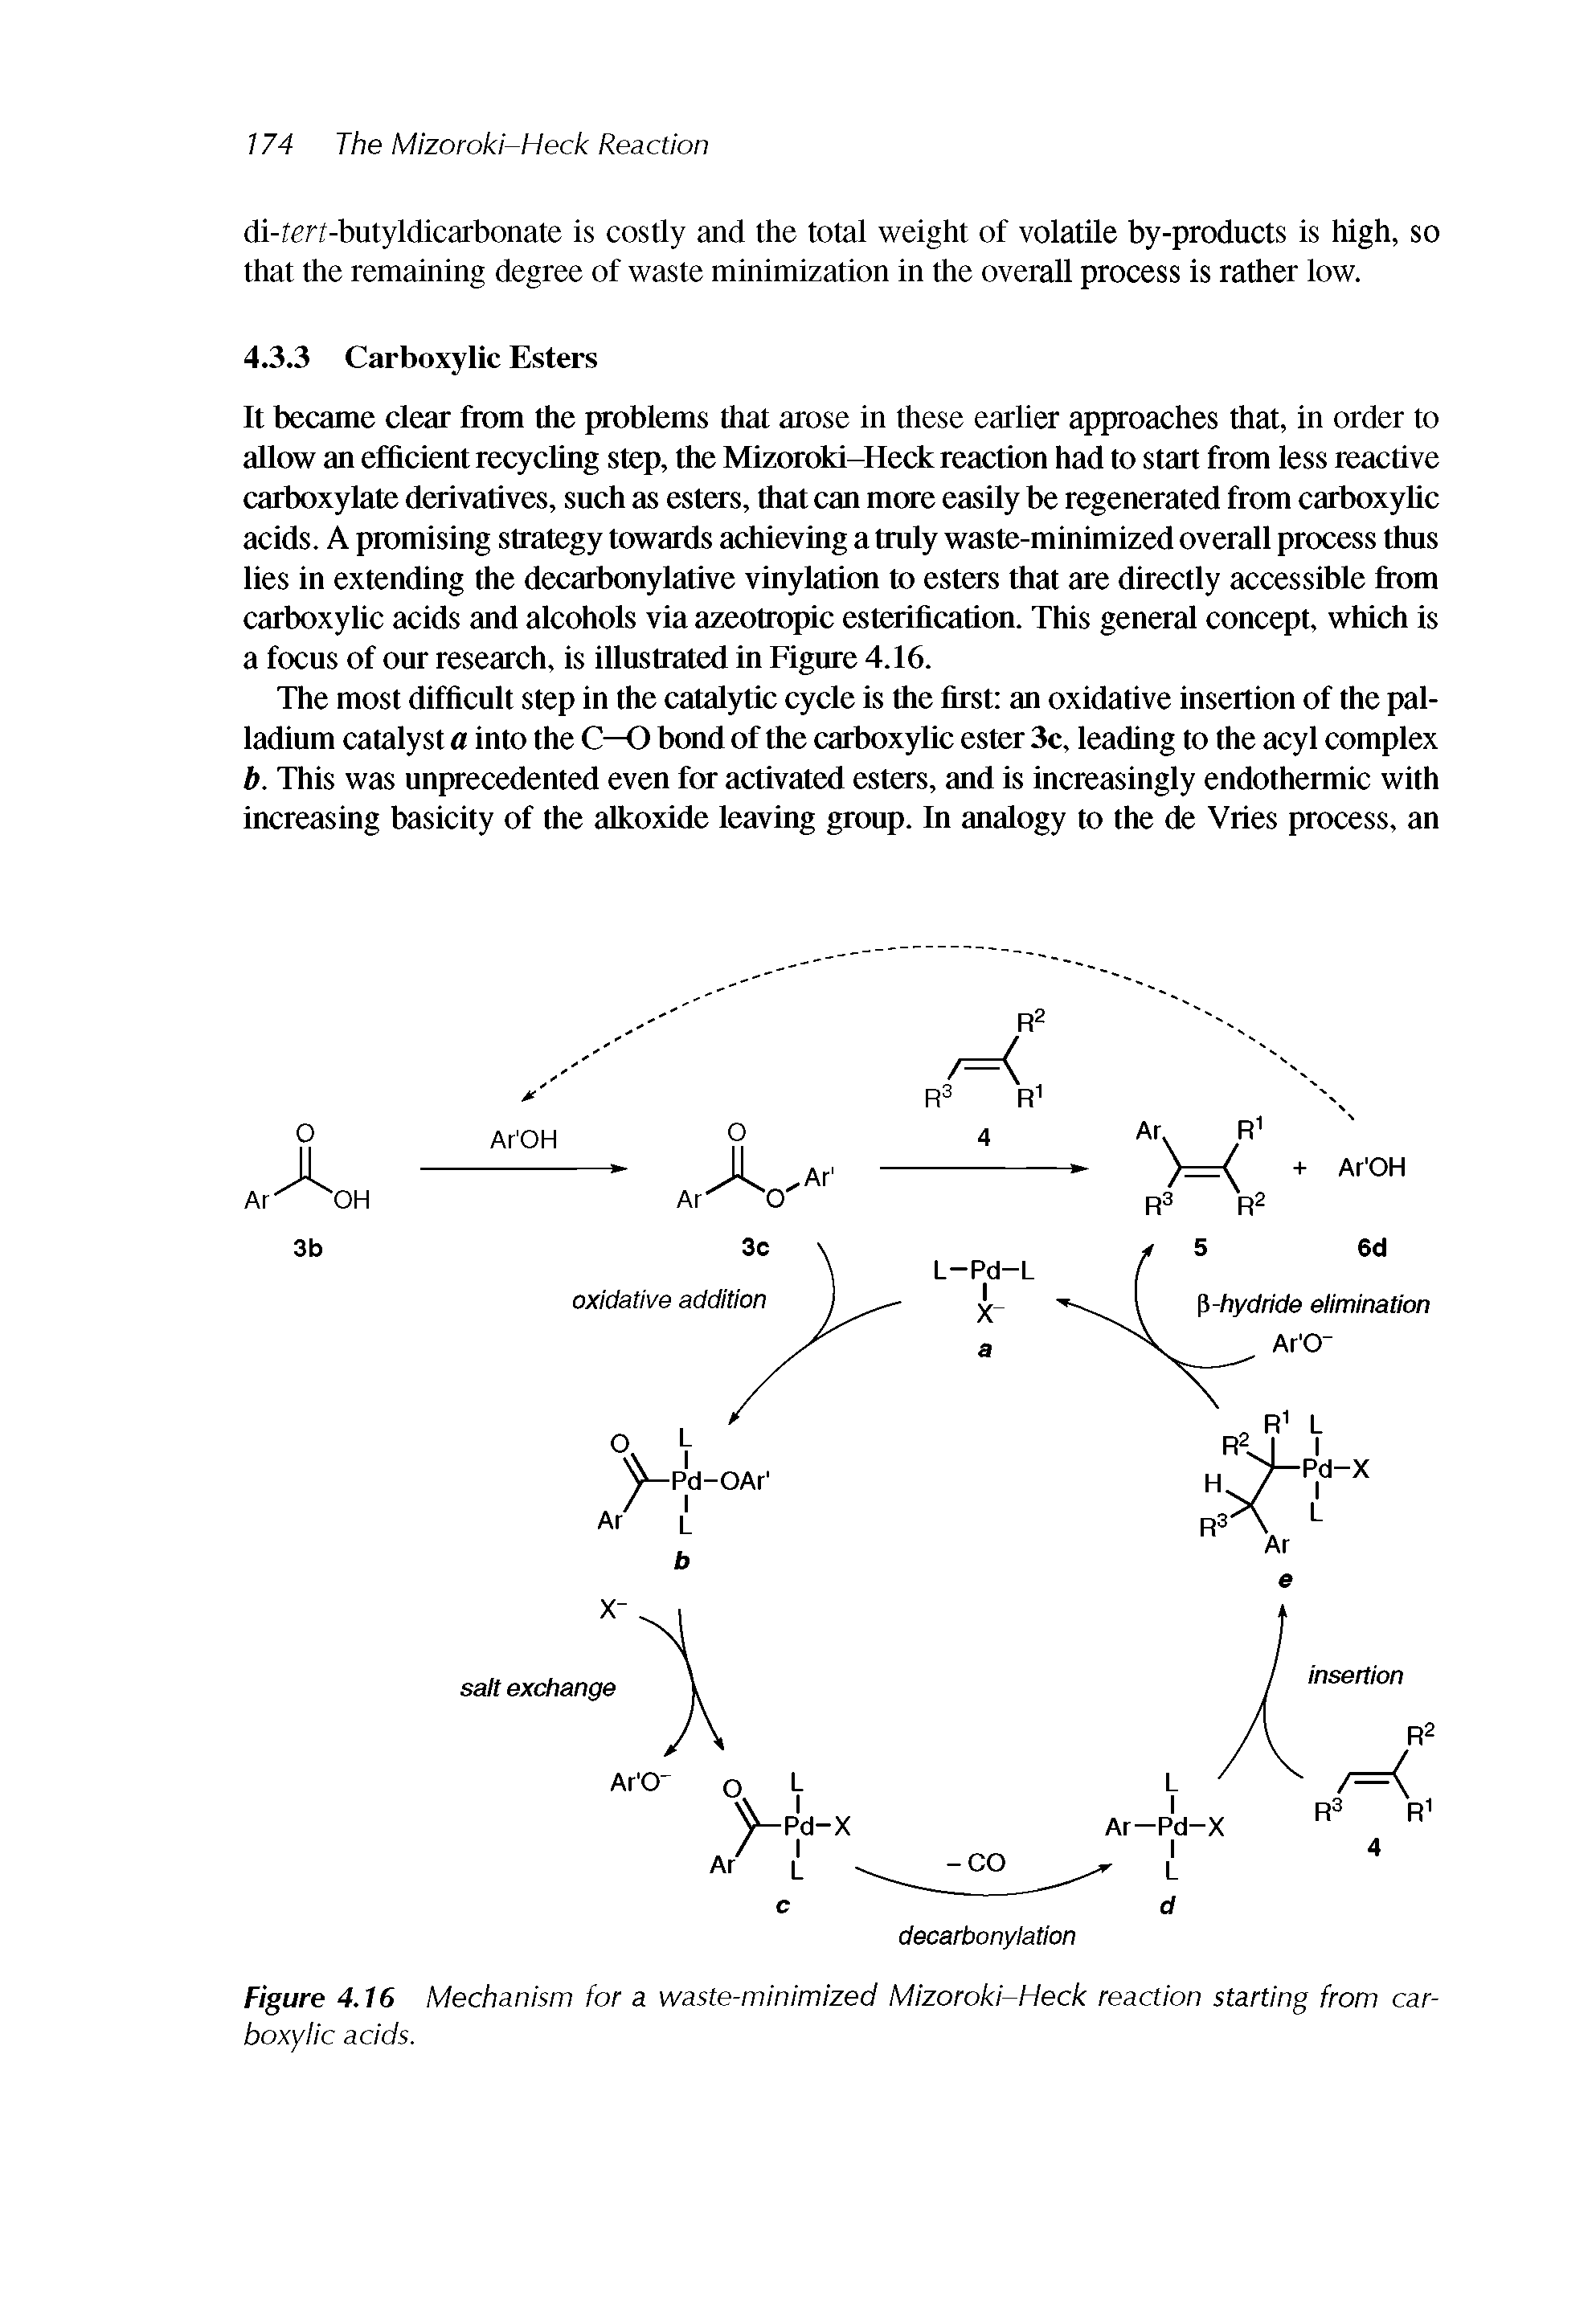 Figure 4.16 Mechanism for a waste-minimized Mizoroki-Heck reaction starting from carboxylic acids.